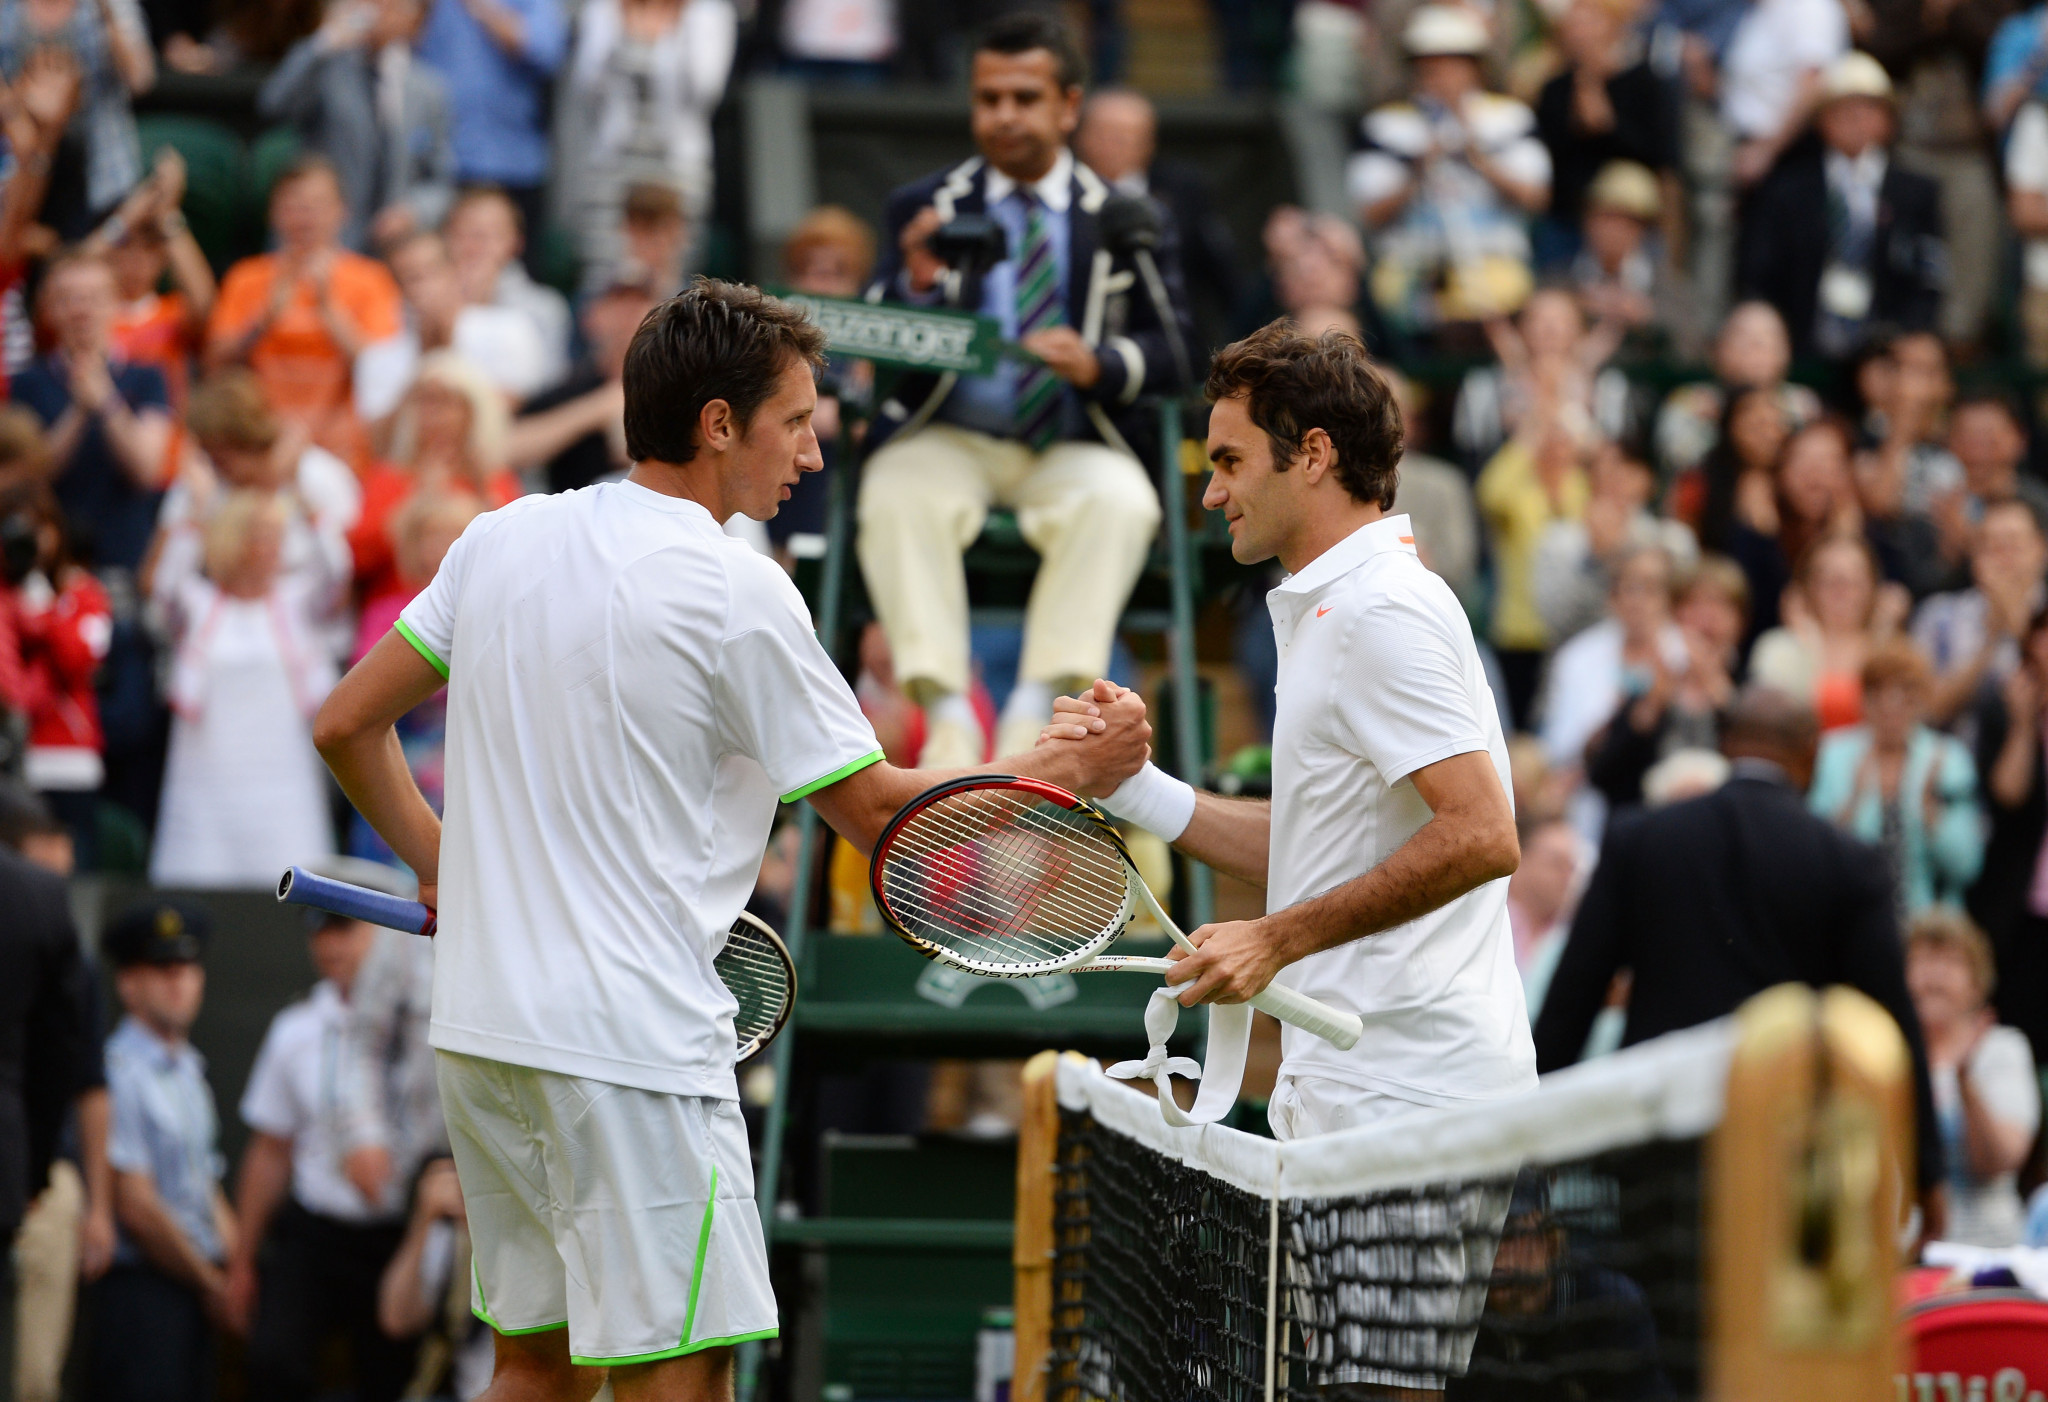 Wimbledon was the scene of Ukrainian Sergiy Stakhovsky's, left, most famous career victory against Roger Federer in 2013 ©Getty Images